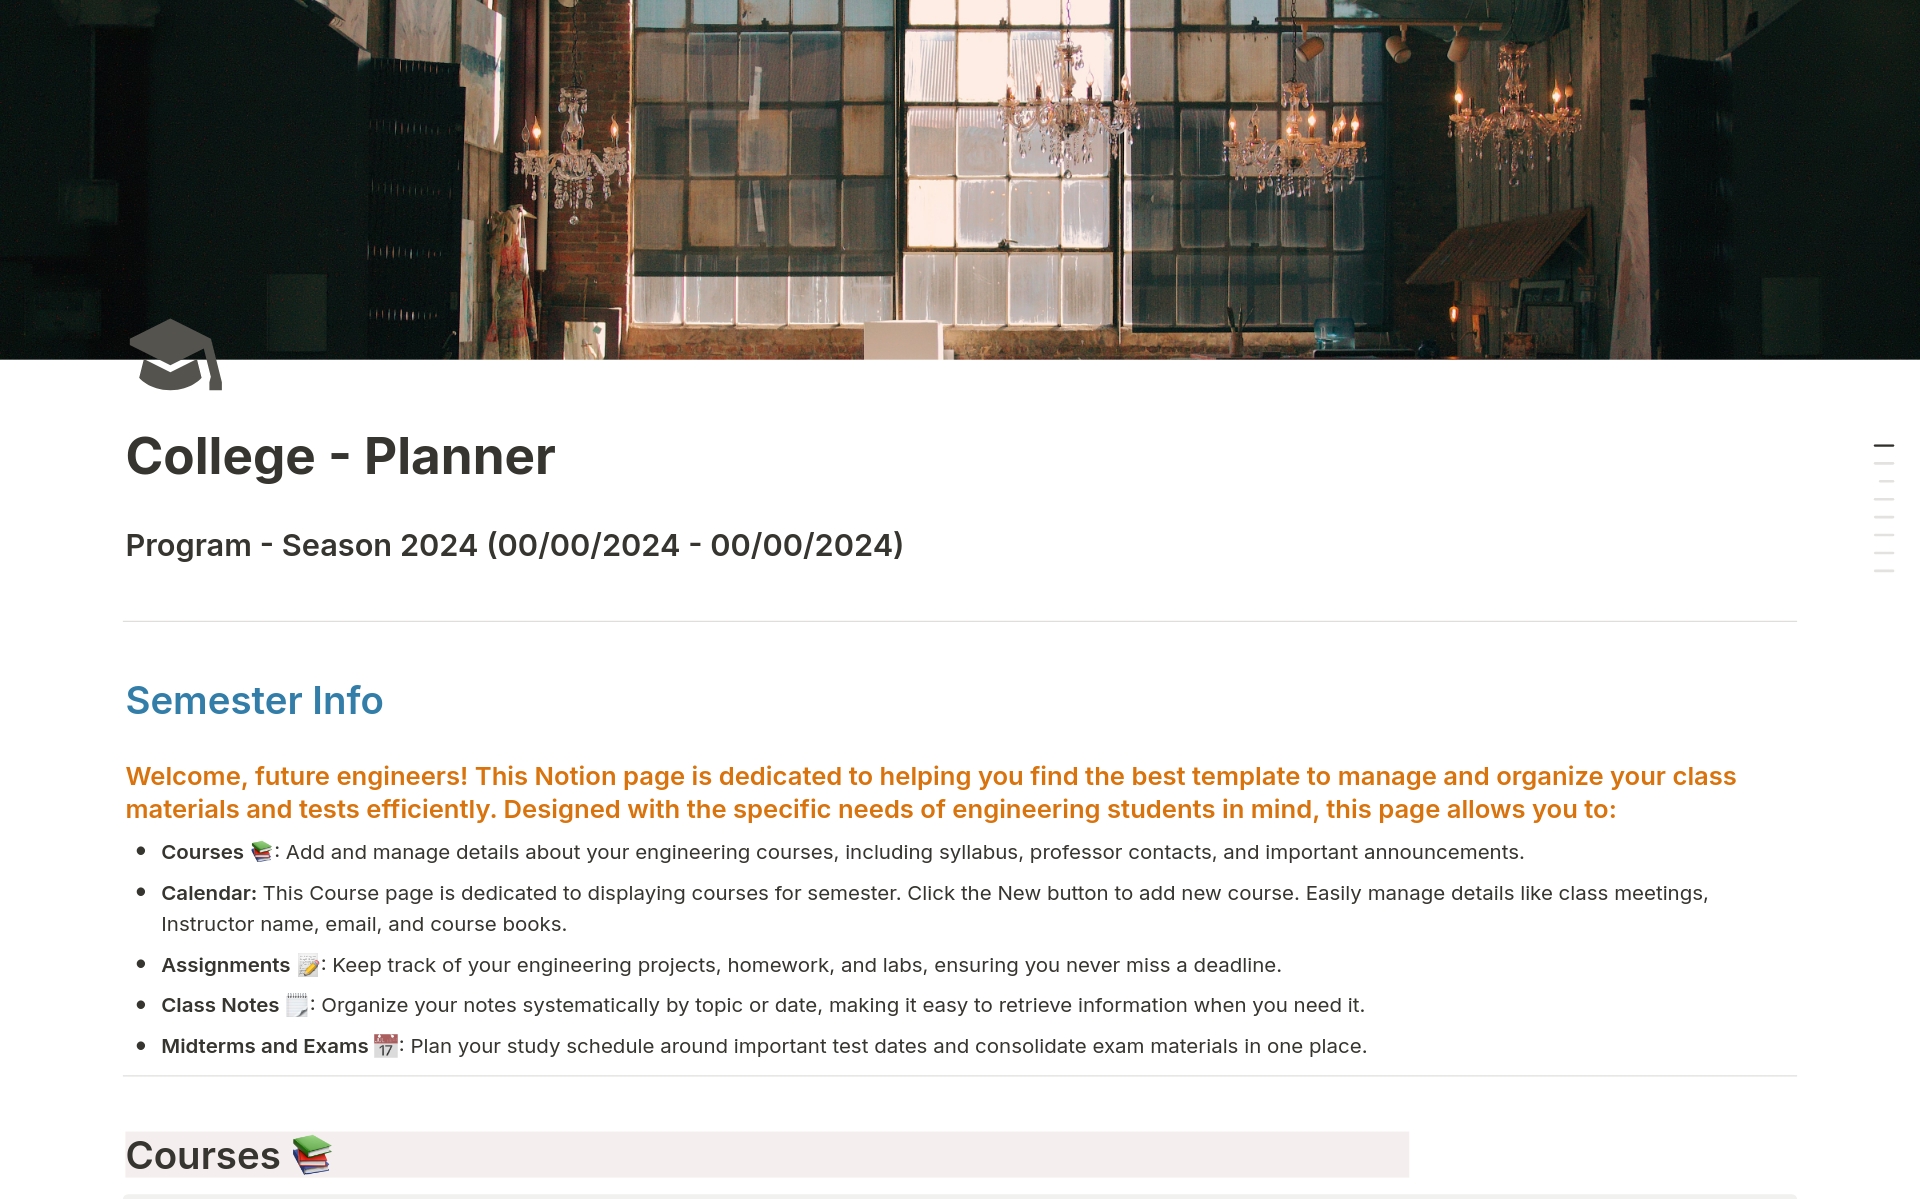 Introducing the ultimate college planner template for Notion! Organize your academic life with sections for courses, class notes, calendar, and assignments. Keep track of your classes, take detailed notes, manage deadlines, and plan your week effortlessly.